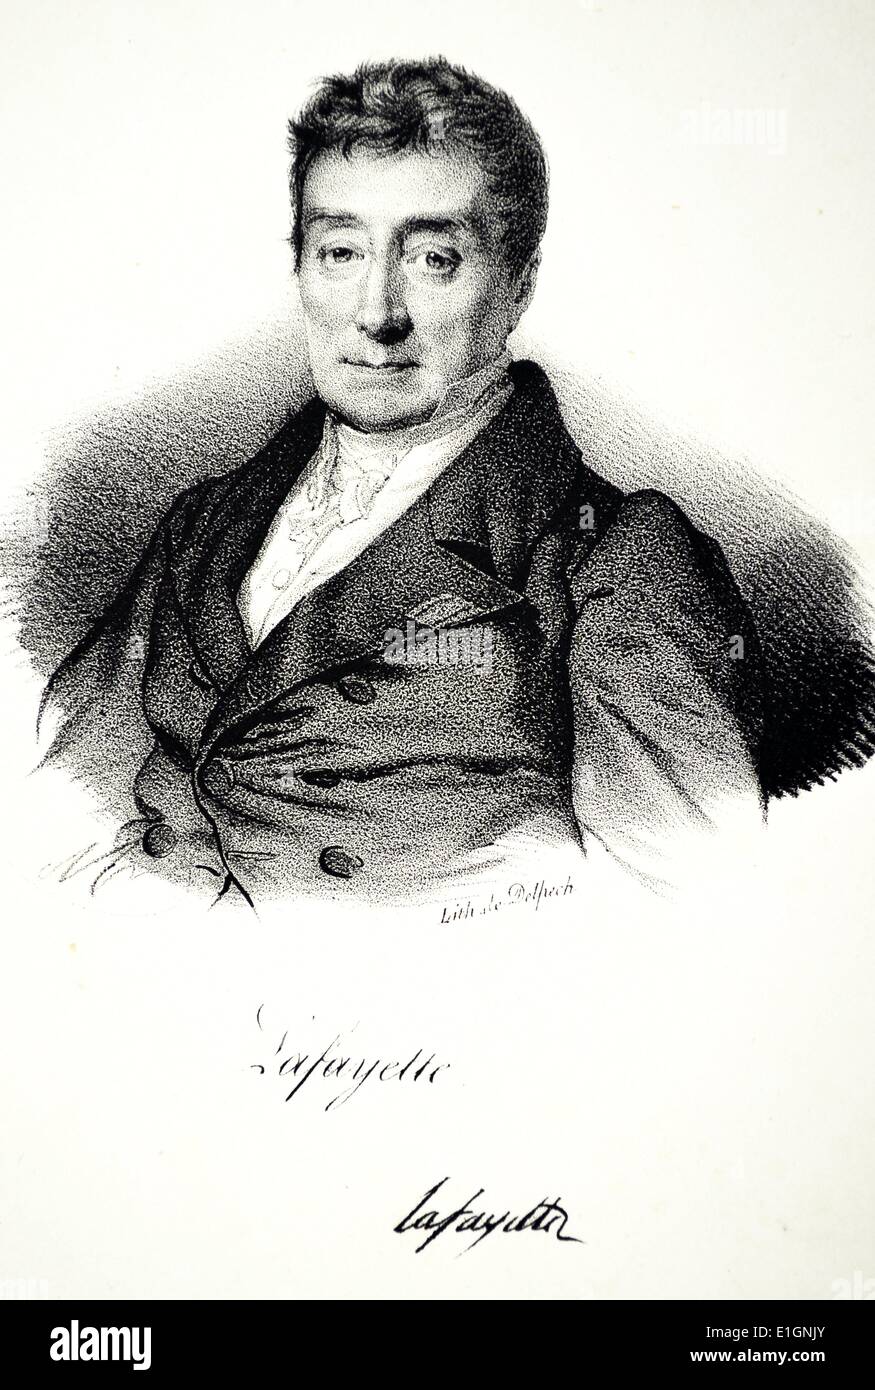 Marie-Joseph Paul Yves Roch Gilbert du Mortier, Marquis de La Fayette (1757-1834), usually known as Lafayette.  French aristocrat and soldier. A general in the American Revolutionary War. Lithograph, Paris, 1832. Stock Photo